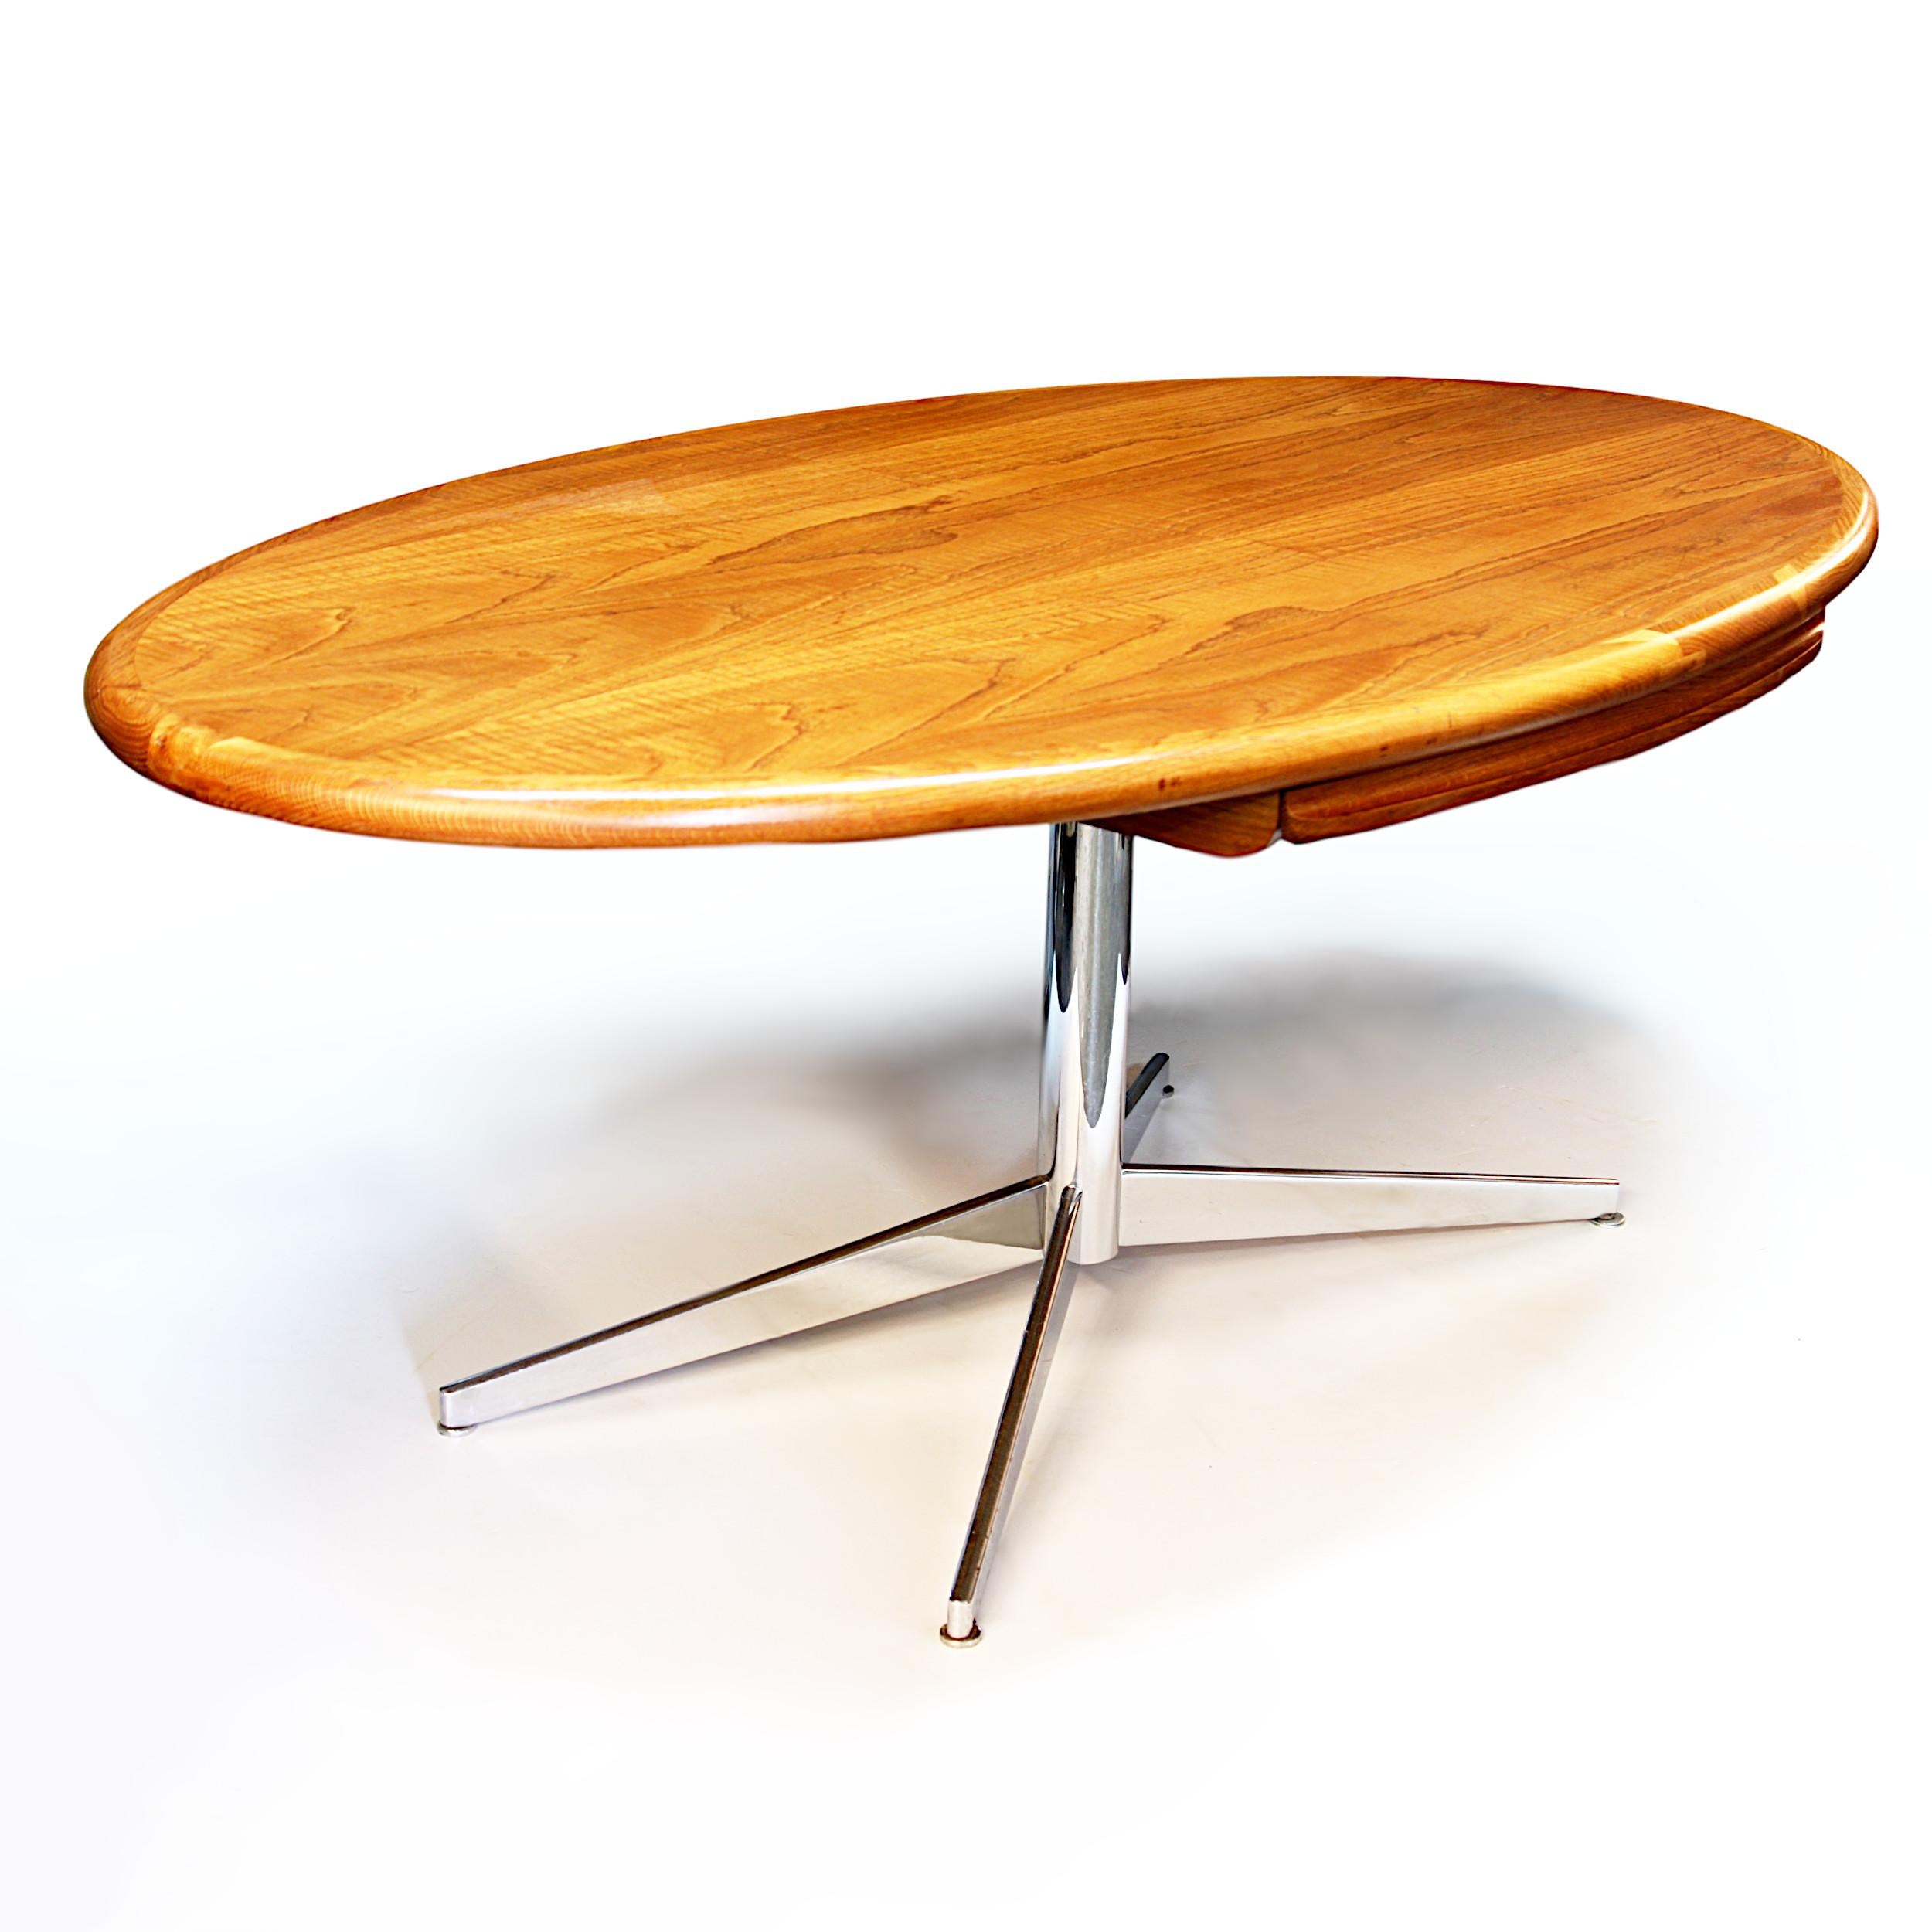 Custom-ordered, executive desk by Florence Knoll. Desk features oak oval top, Classic chrome base, and center drawer. The rare, custom made, oak top features a thick, rounded edge made from solid oak and center drawer with sculpted oak front! A very